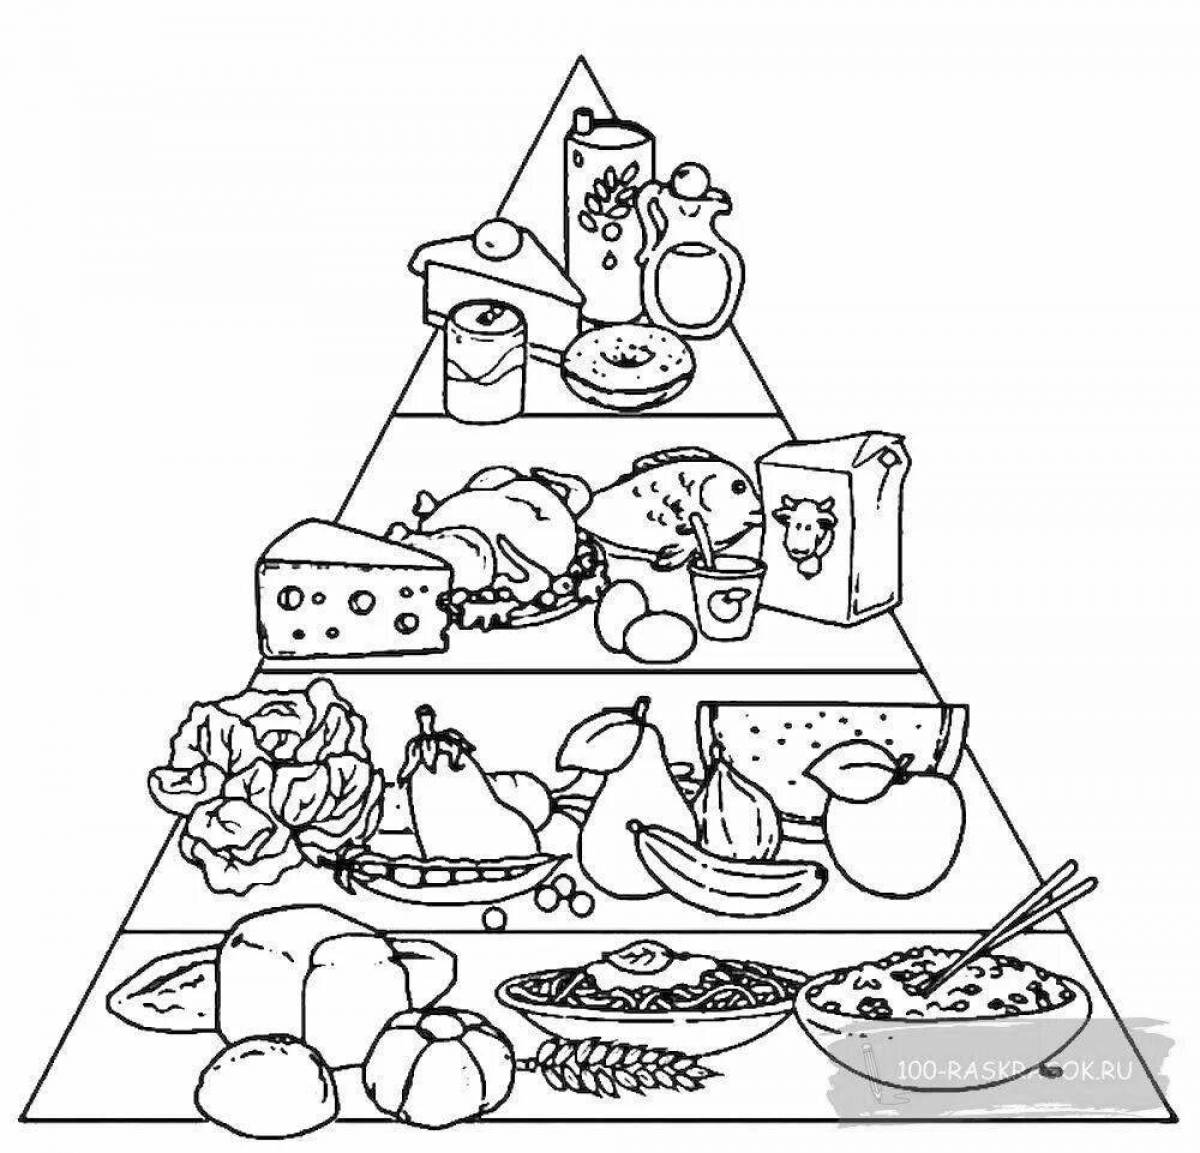 Coloring book with nutrients healthy food